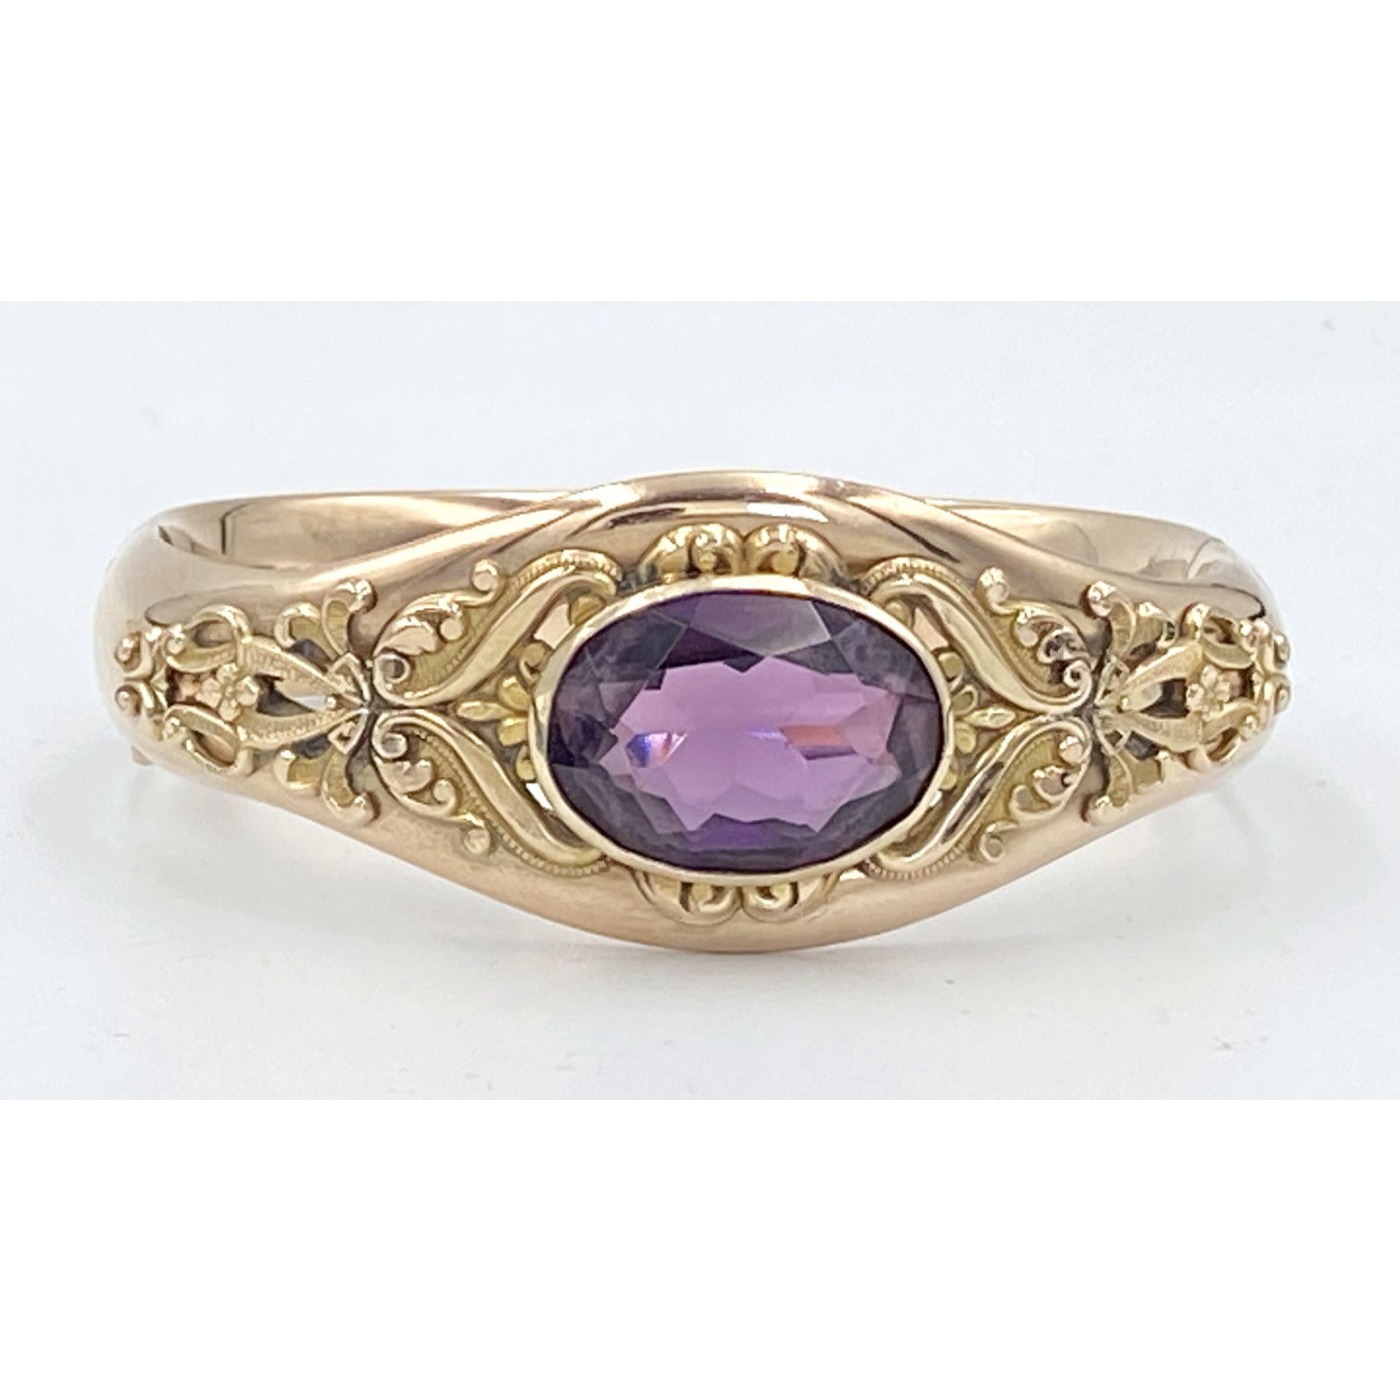 Fabulous Victorian Gold-Filled Bangle with Perfect Color Purple Stone